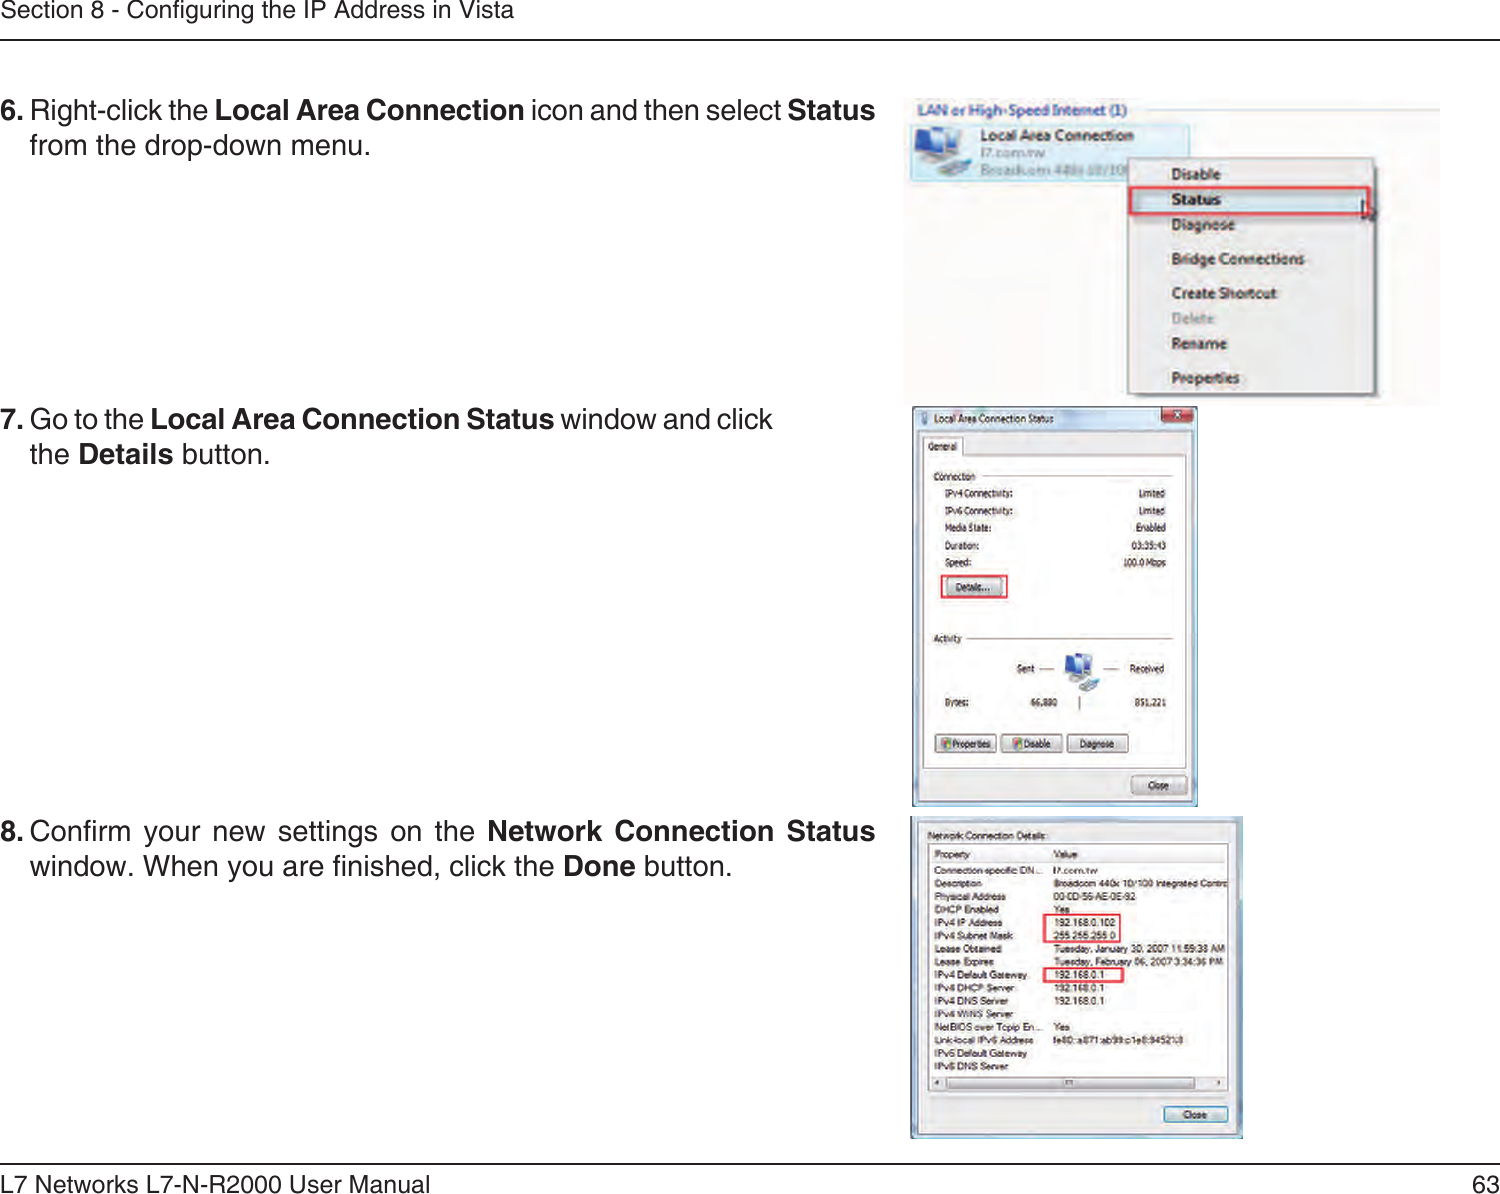 63L7 Networks L7-N-R2000 User ManualSection 8 - Conguring the IP Address in Vista6. Right-click the Local Area Connection icon and then select Status from the drop-down menu. 7. Go to the Local Area Connection Status window and click the Details button. 8. Conrm  your  new  settings  on  the  Network  Connection  Status window. When you are nished, click the Done button. 